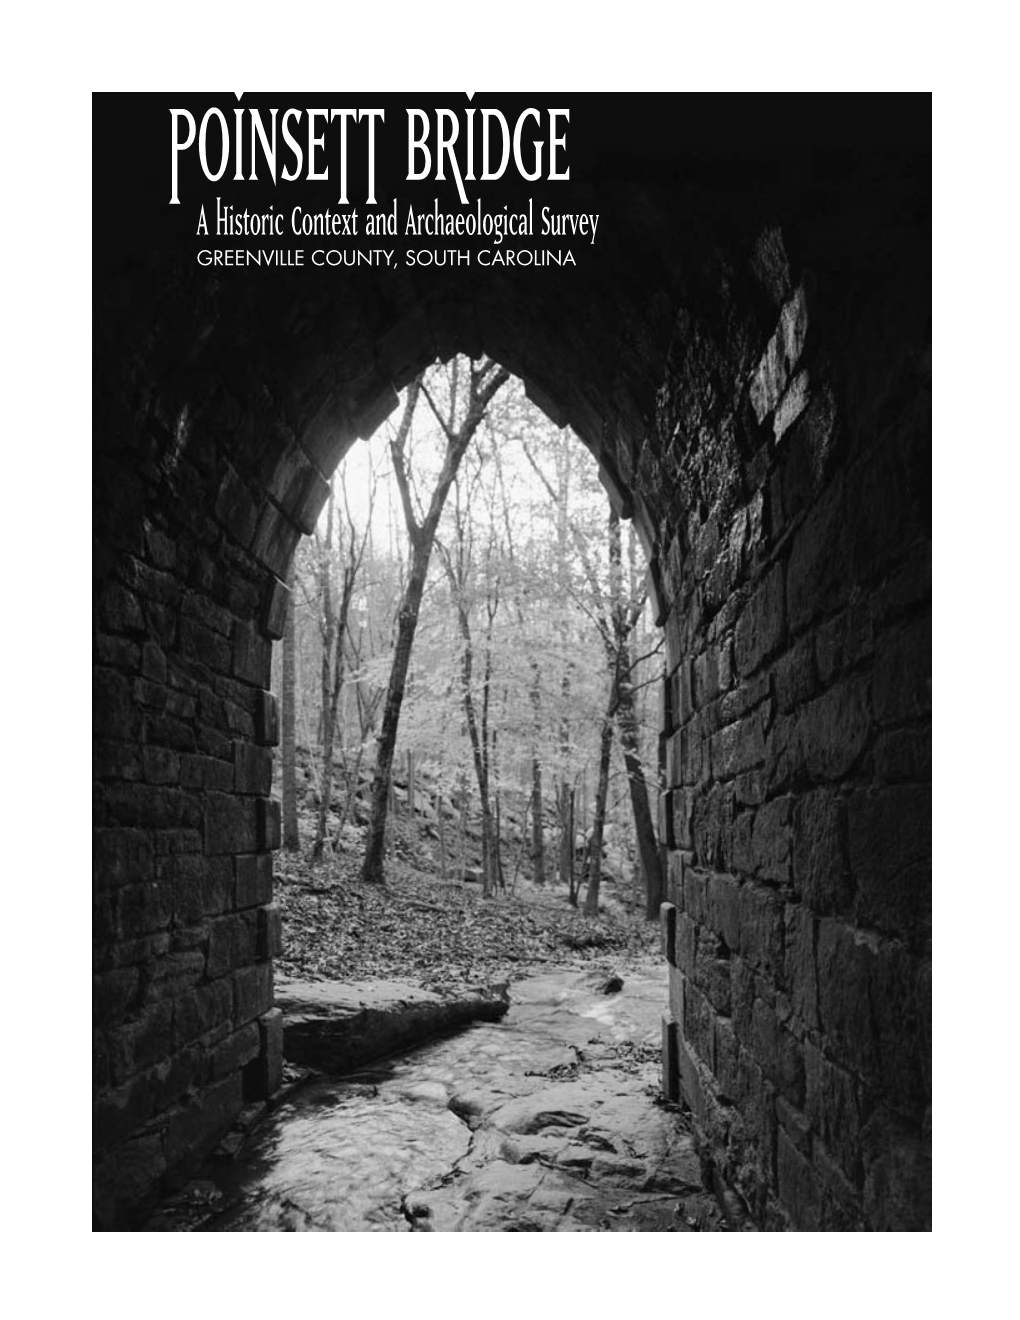 Poinsett Bridge: a Historic Context and Archaeological Survey, Greenville County, South Carolina